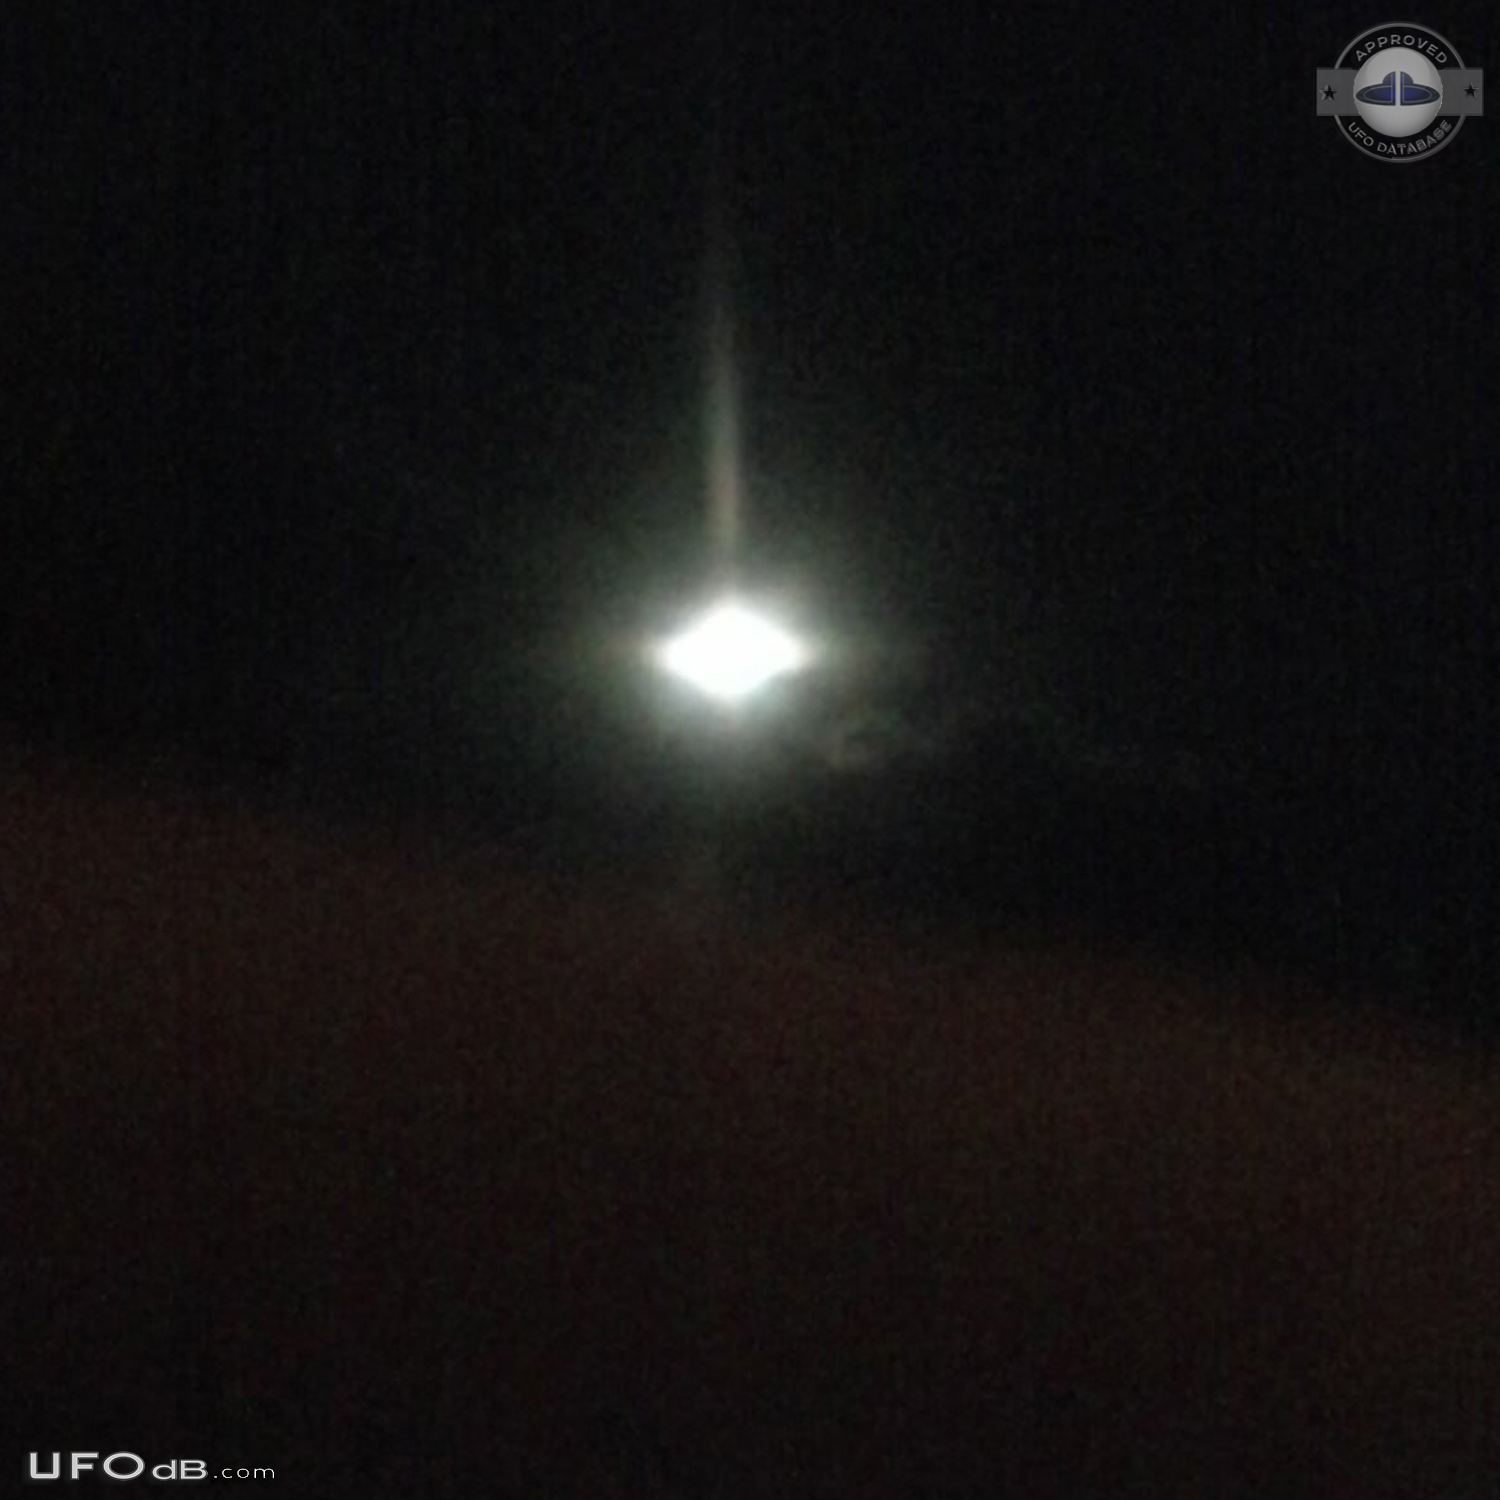 On the porch and snapped a couple pictures before UFO left - 2014 UFO Picture #678-2